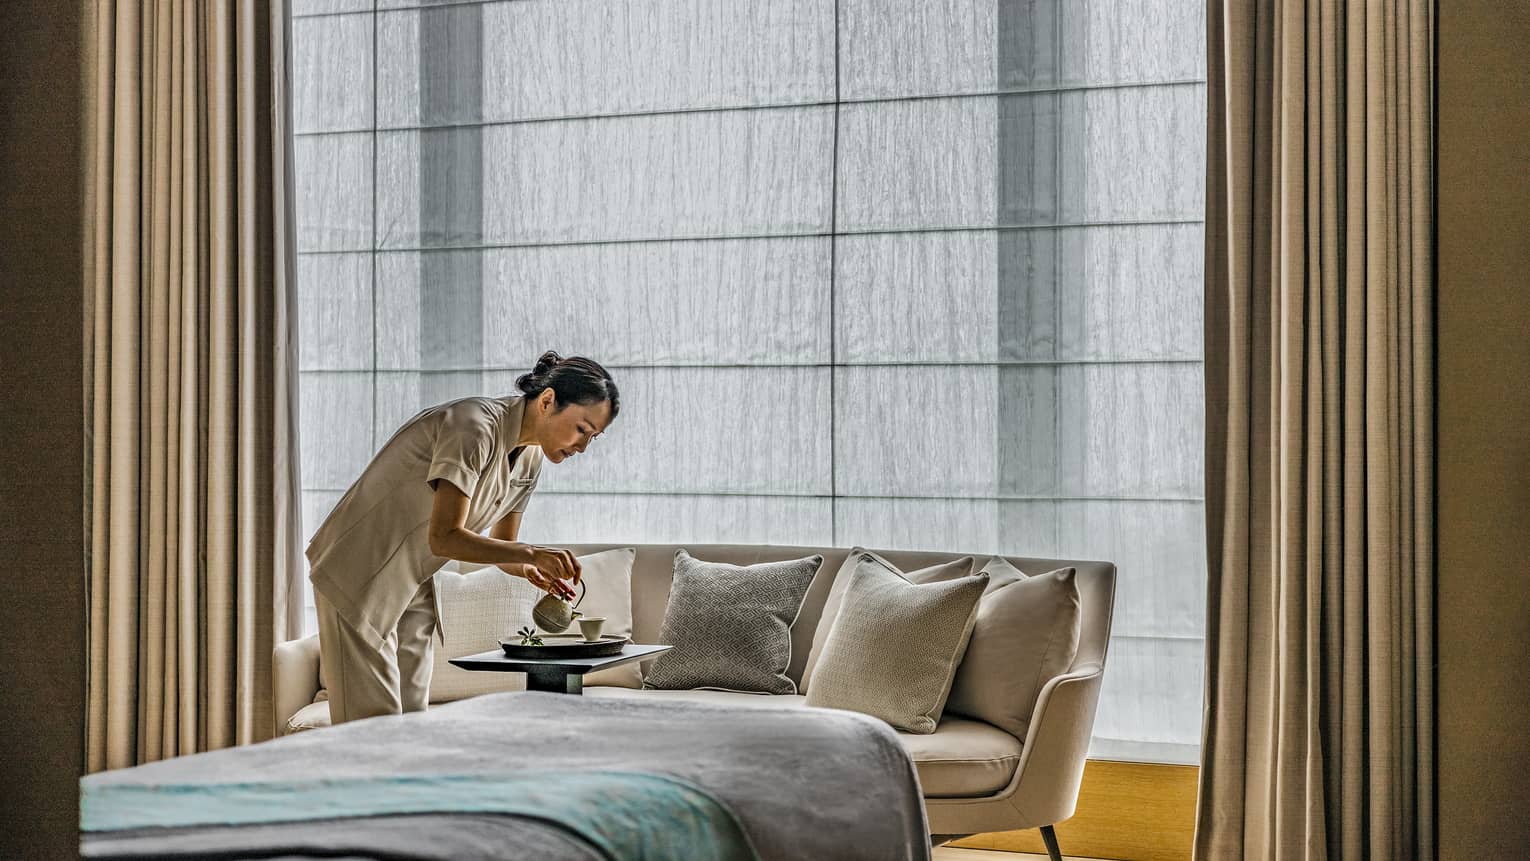 Spa team member pours hot tea into a cup, a cream couch and treatment table in the background 